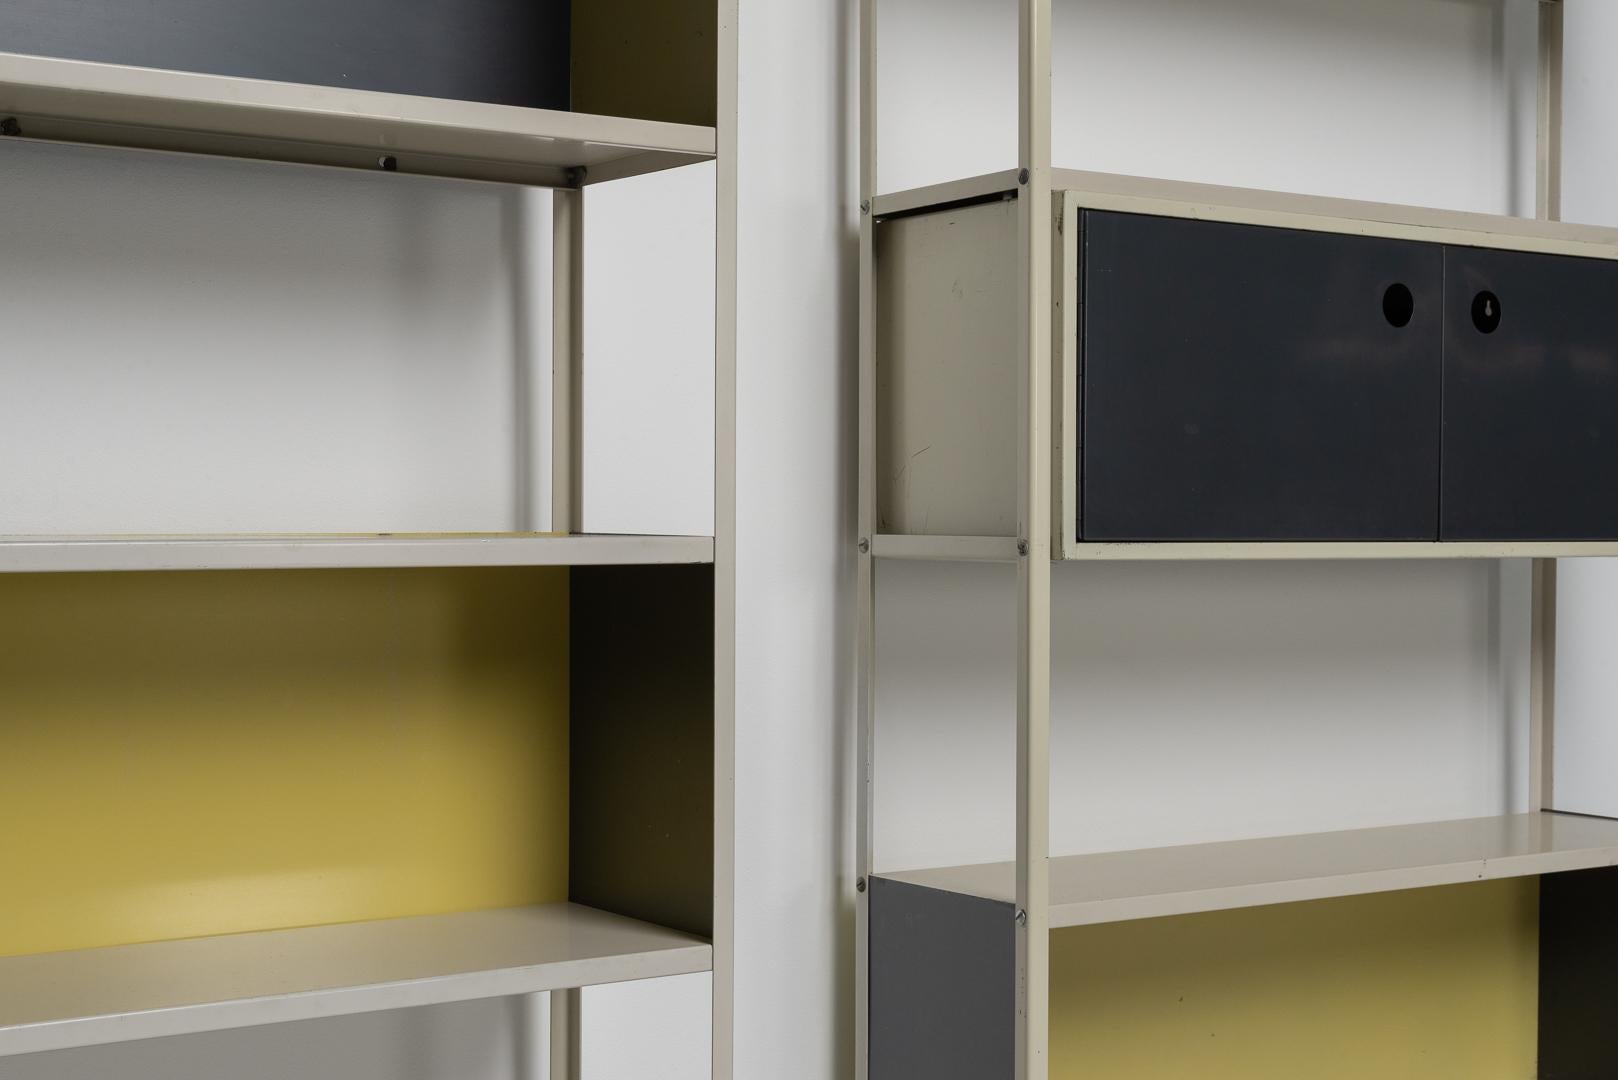 Rare metal bookcase shelving unit designed by Friso Kramer for De Bijenkorf produced by Asmeta in 1953. Martin Visser commissioned Friso Kramer to design a simple usable shelving unit for de Bijenkorf. The beautiful combination of colours reflected